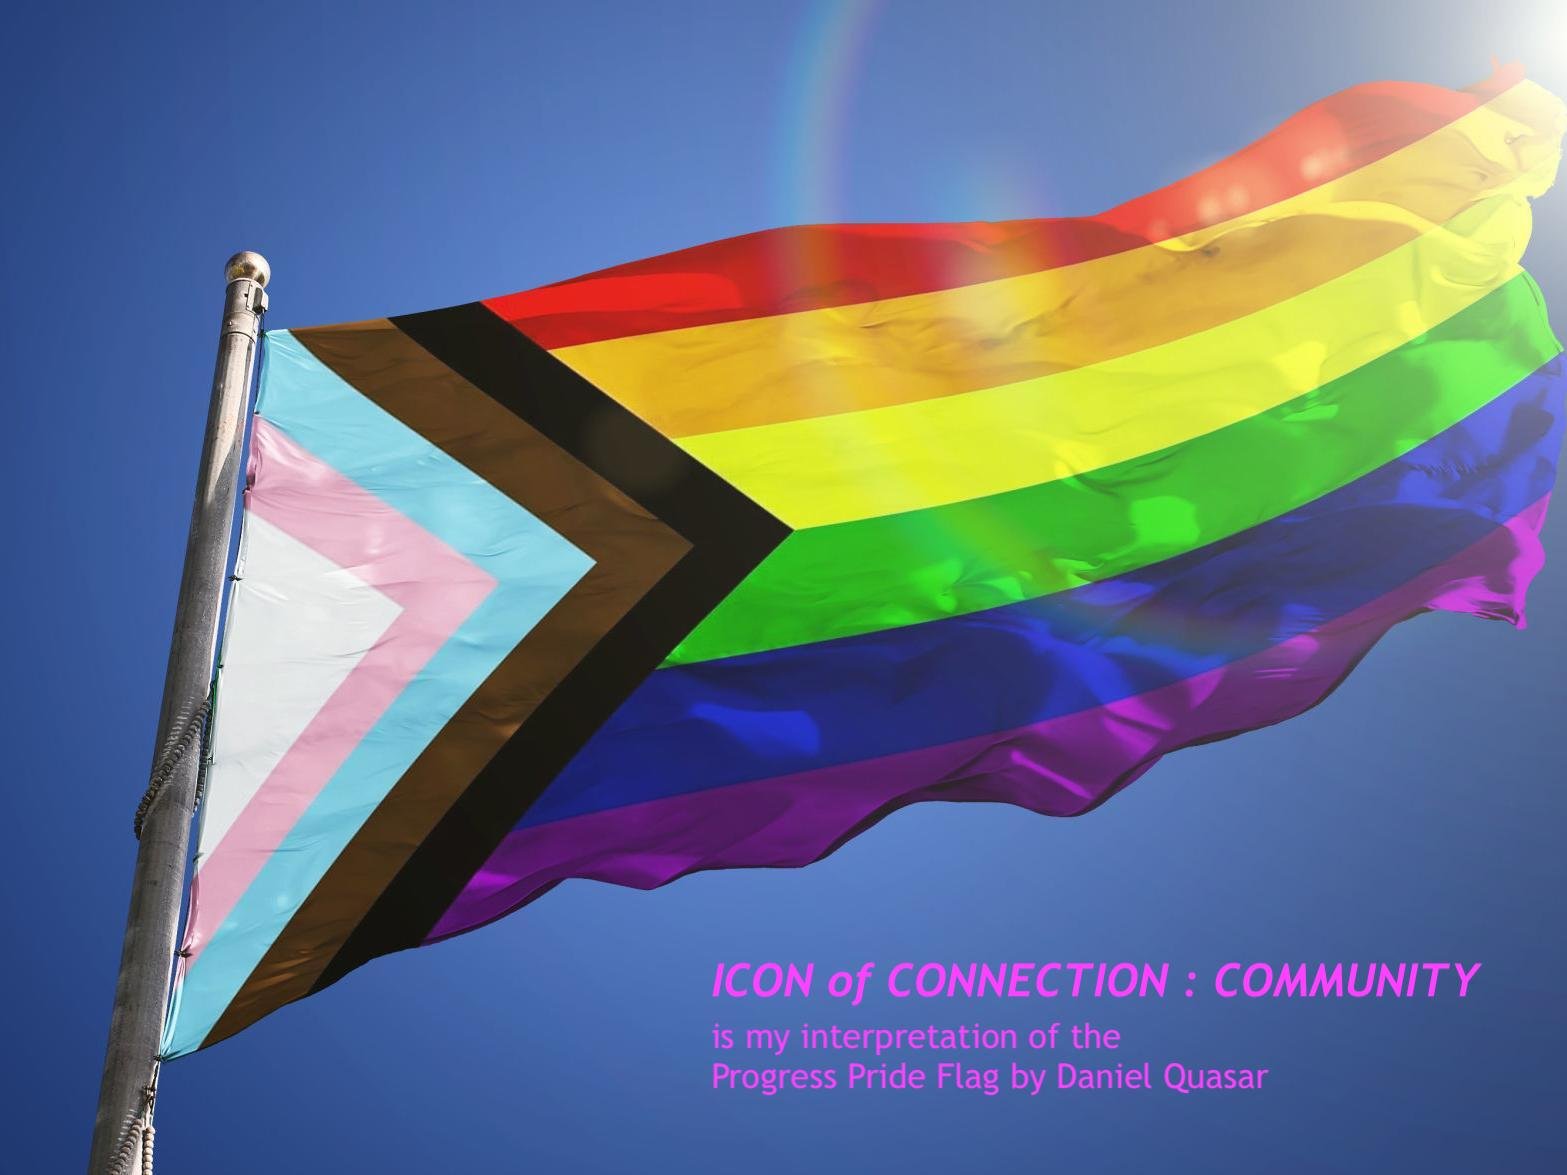 27d-Hallie-Rae-Ward-Icon-of-connection-community-Progress-Pride-Flag-Art-For-The-People-Gallery-Austin-Art-Gallery-Local-Art.jpeg